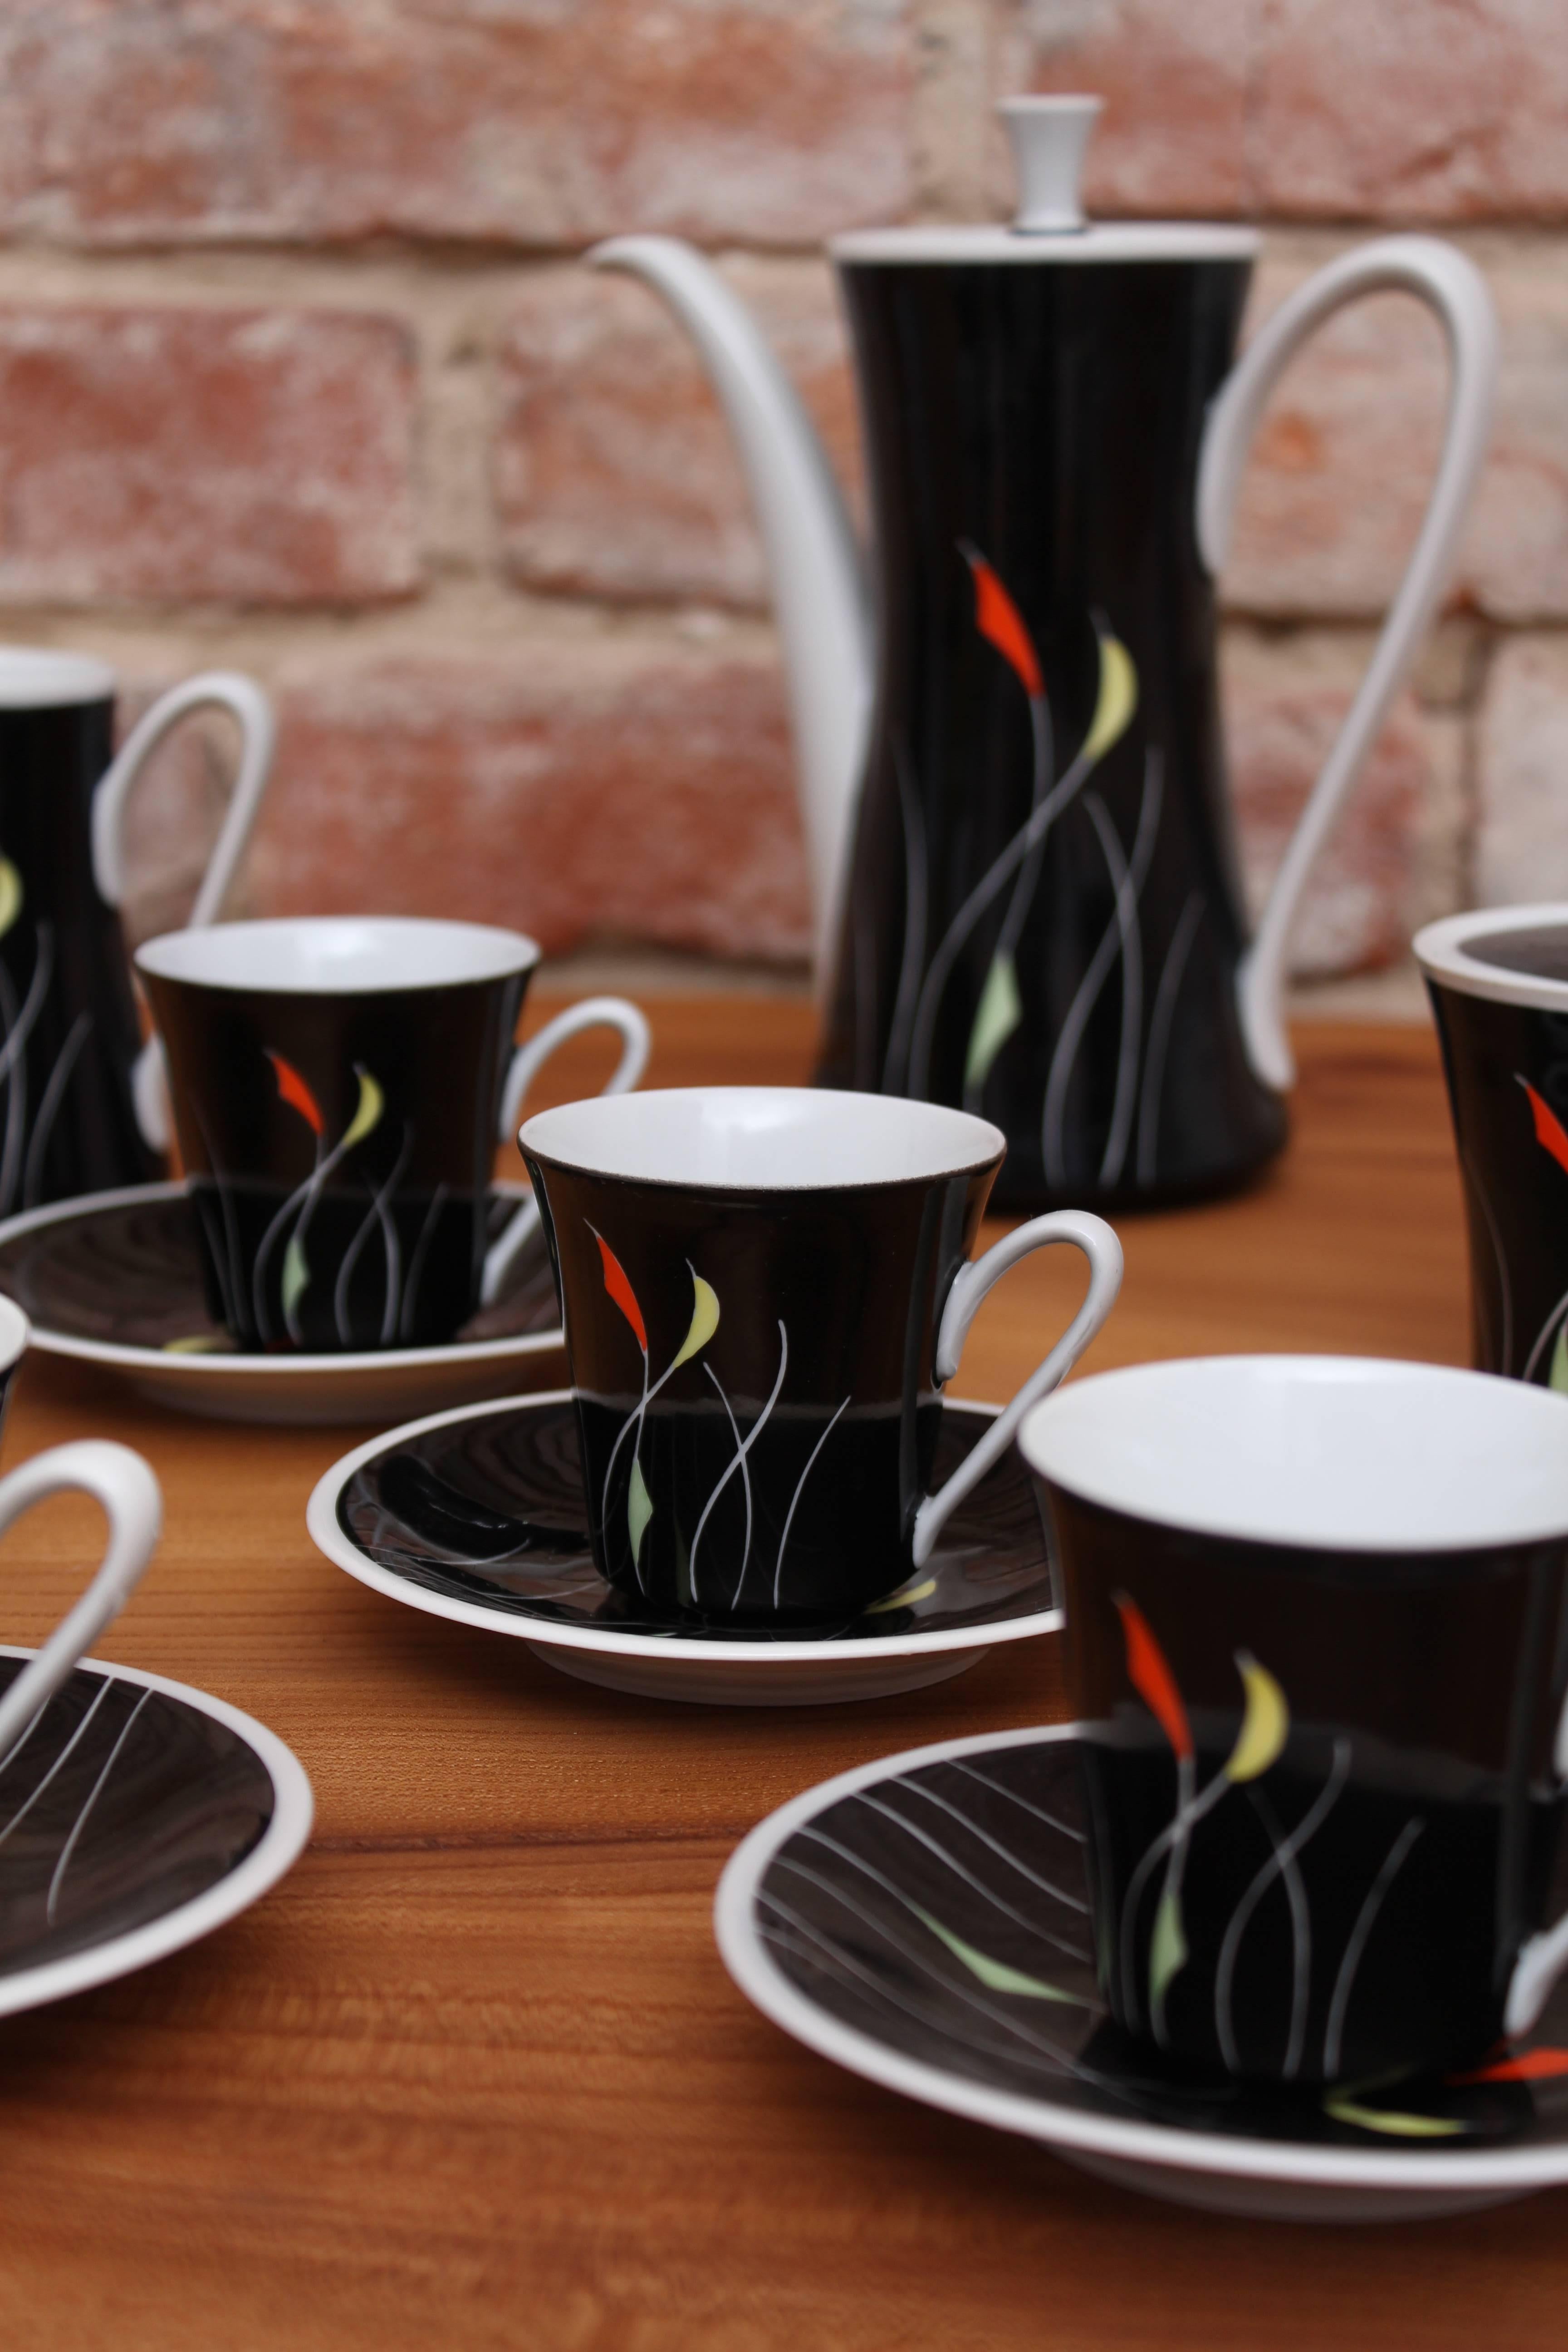 Kahla porcelain coffee set for six in a beautiful hand-painted pattern. The coffee service consists of six plates, six cups, a sugar bowl with a lid, a milk jug and a coffee jug with a lid. The form is smooth and light. The set is in great